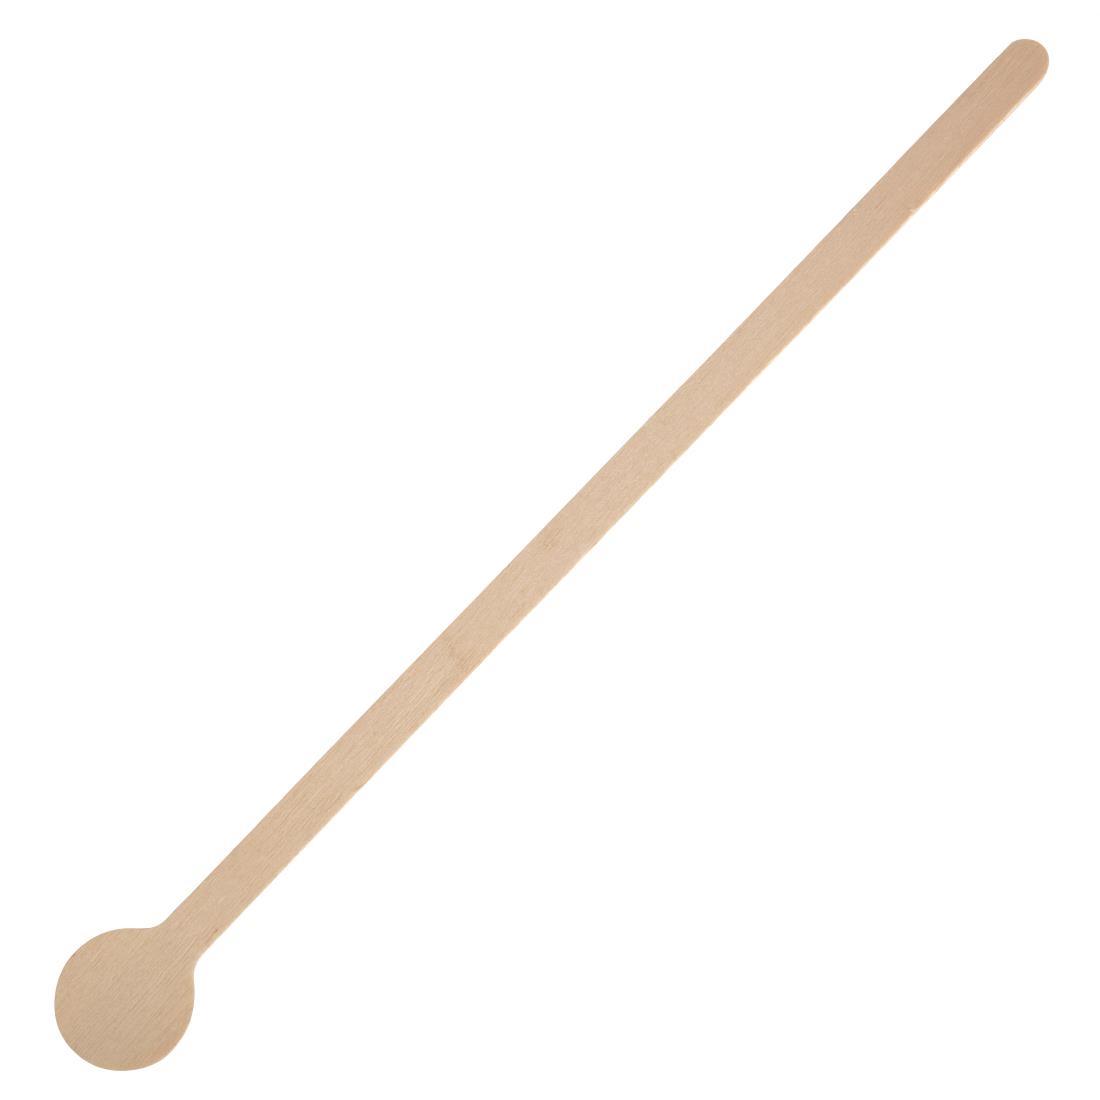 Fiesta Compostable Wooden Cocktail Stirrers 200mm (Pack of 100) - DB494  - 2